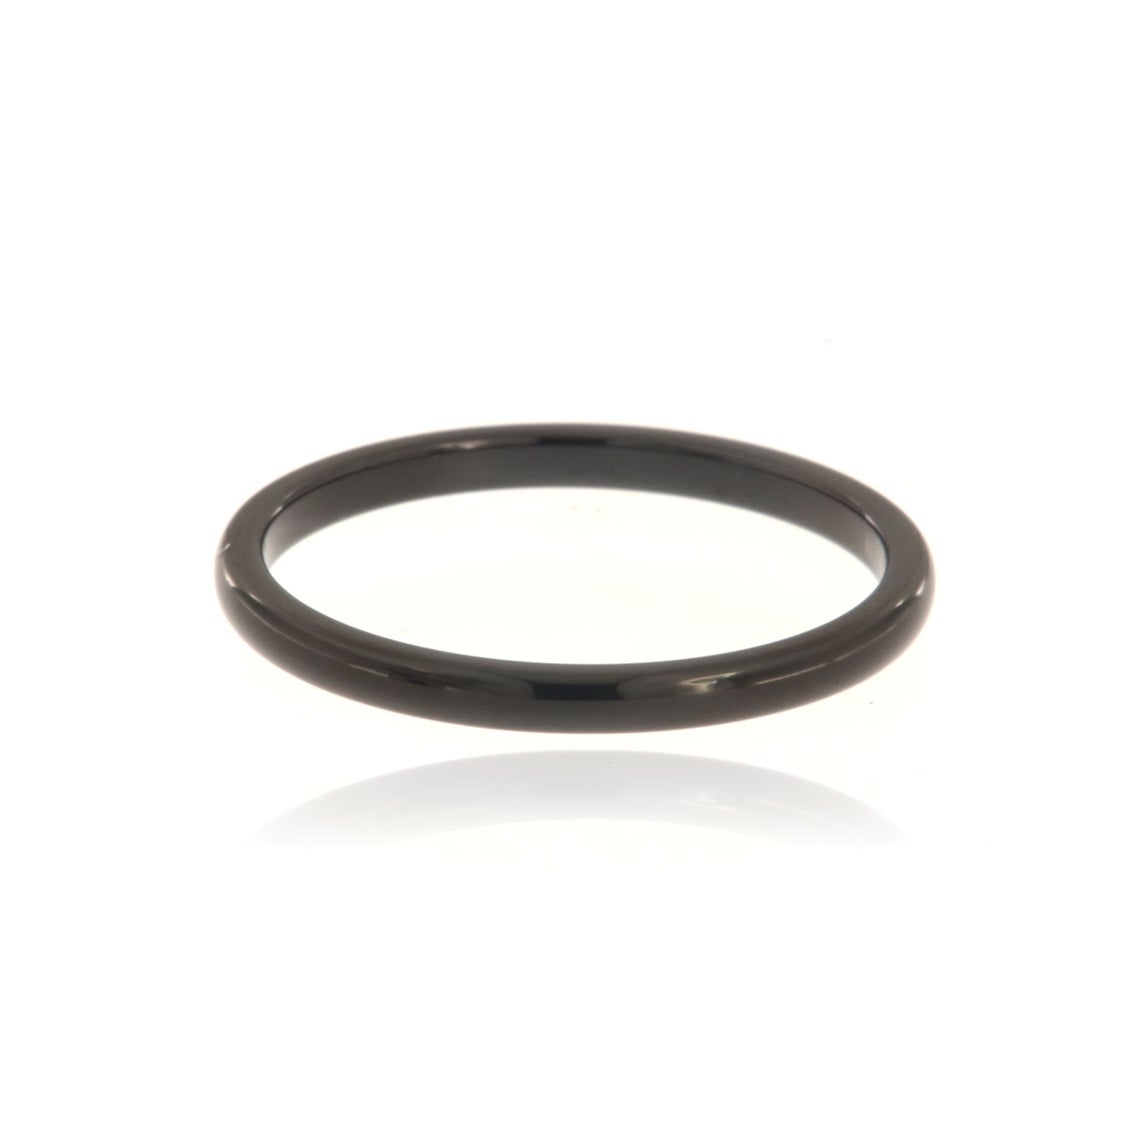 2mm wide tungsten ring with a polished finish and rounded profile